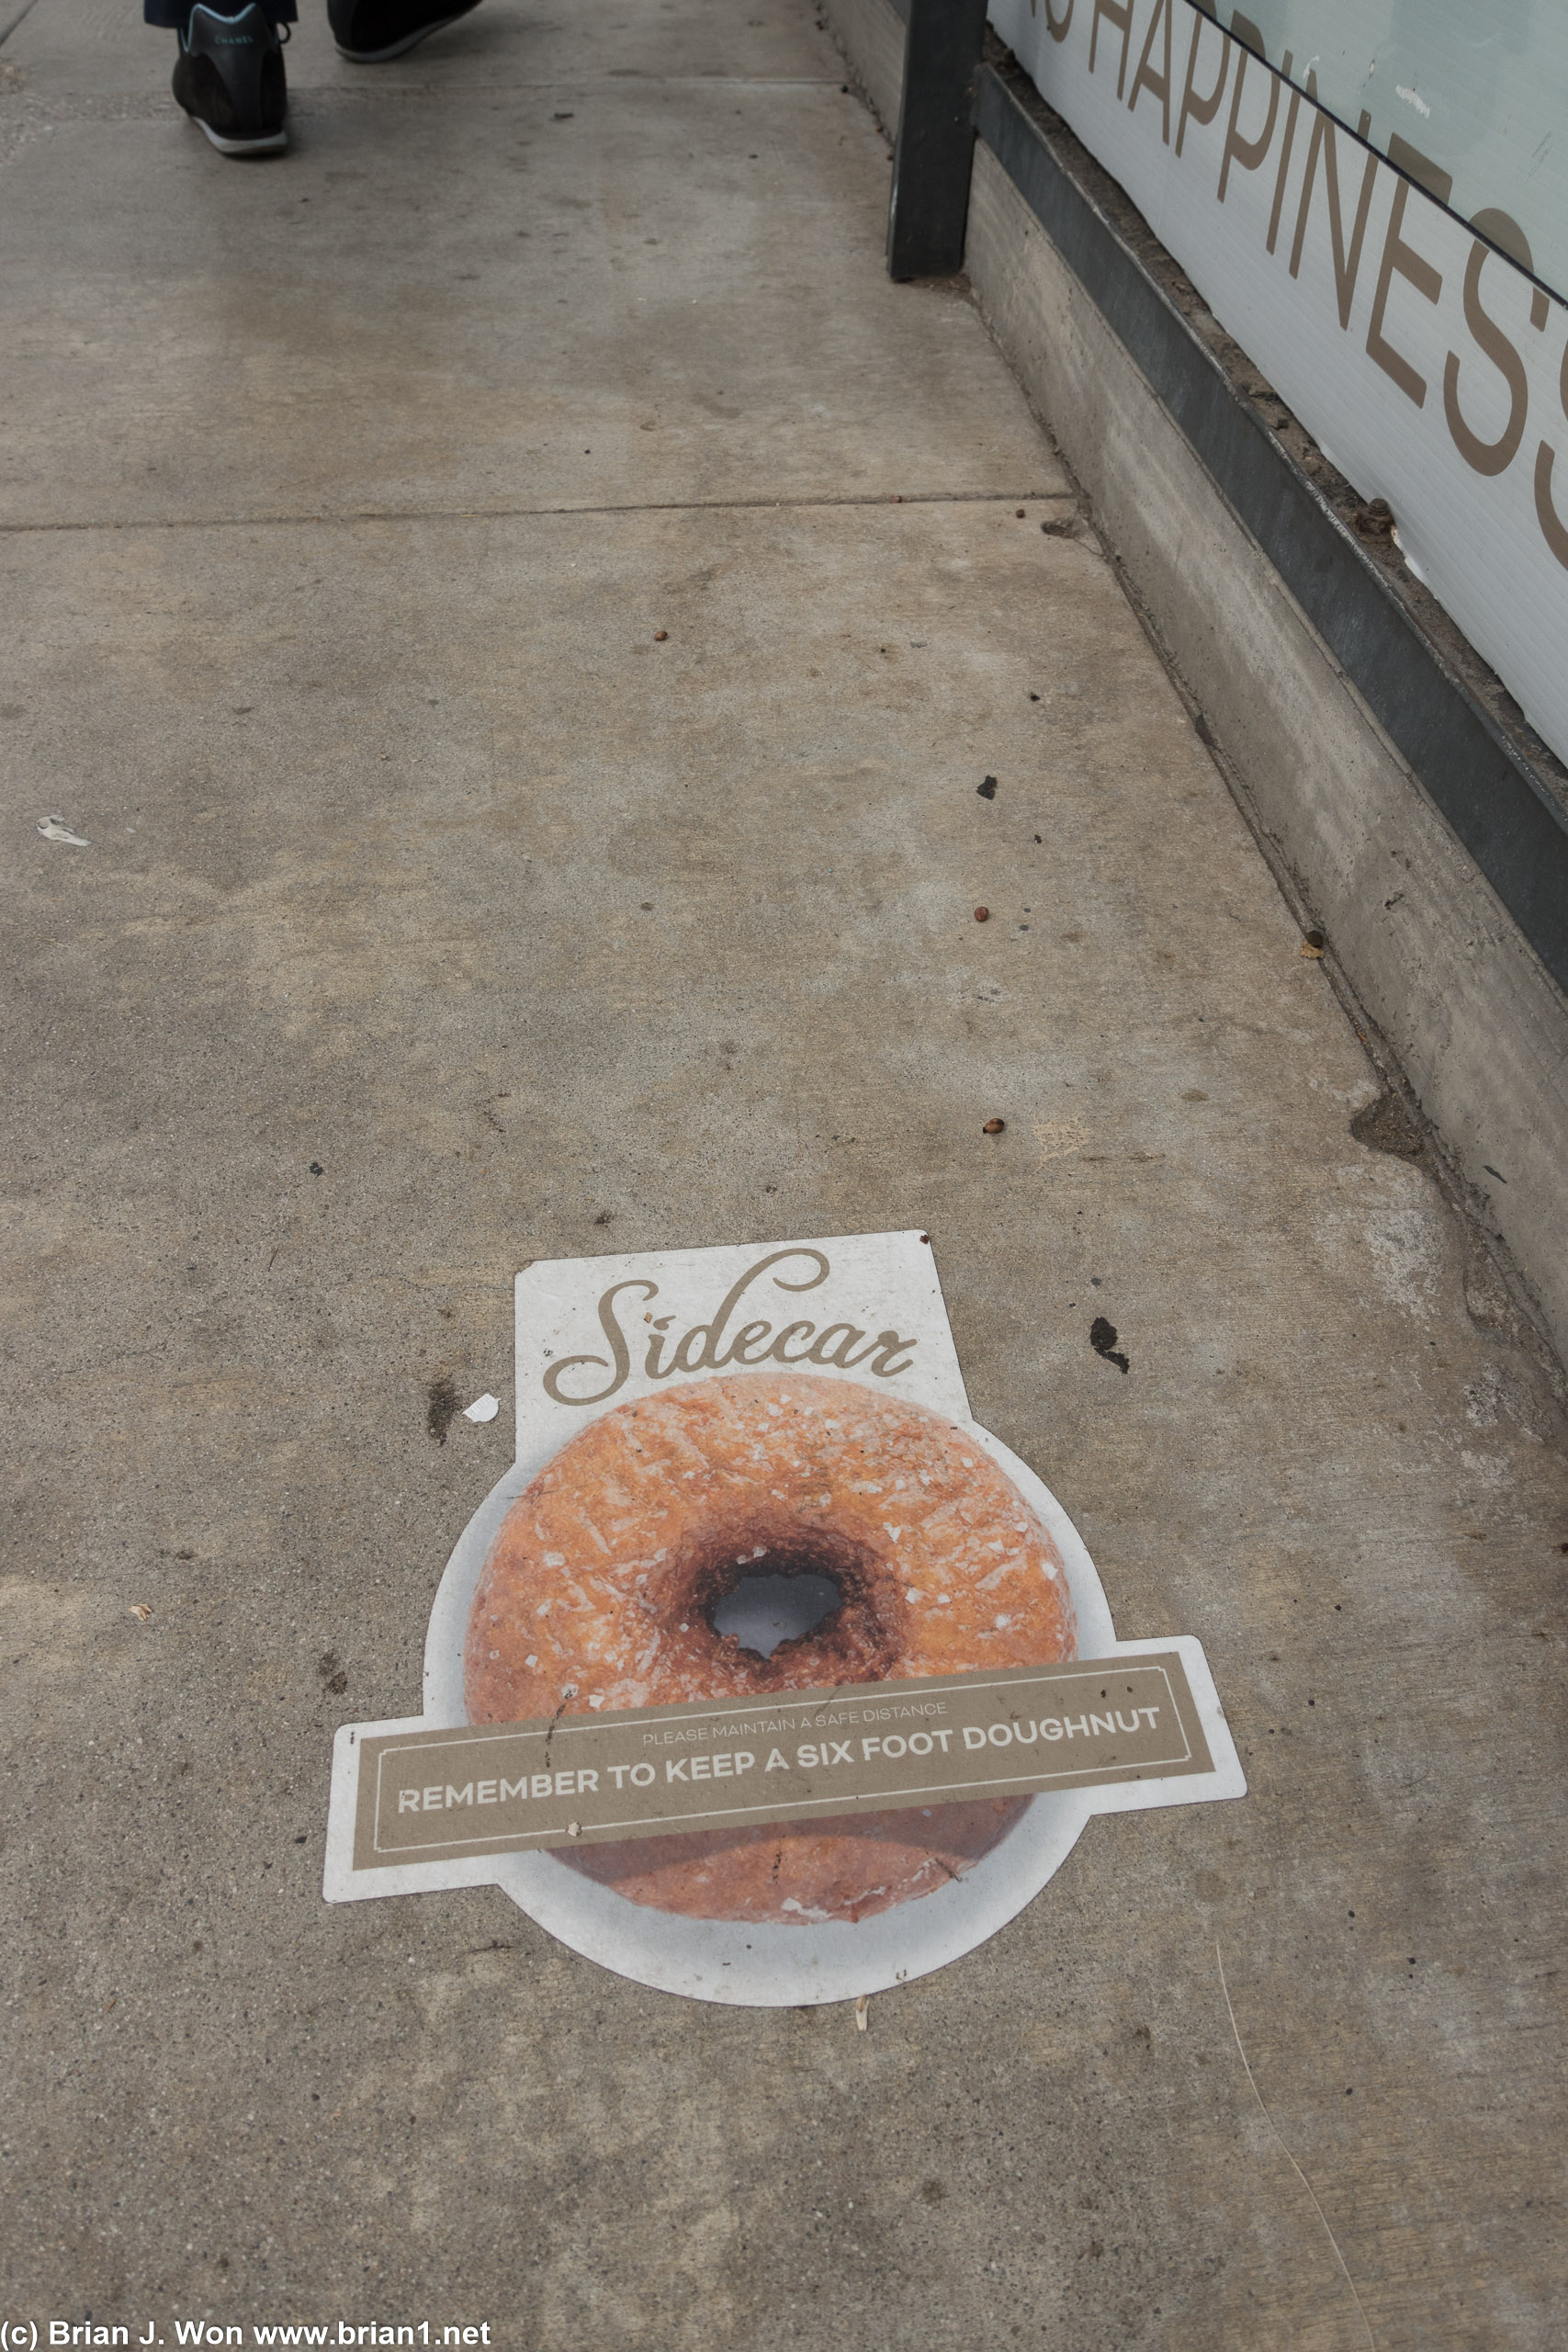 Six foot distance markers for Sidecar Doughnuts.